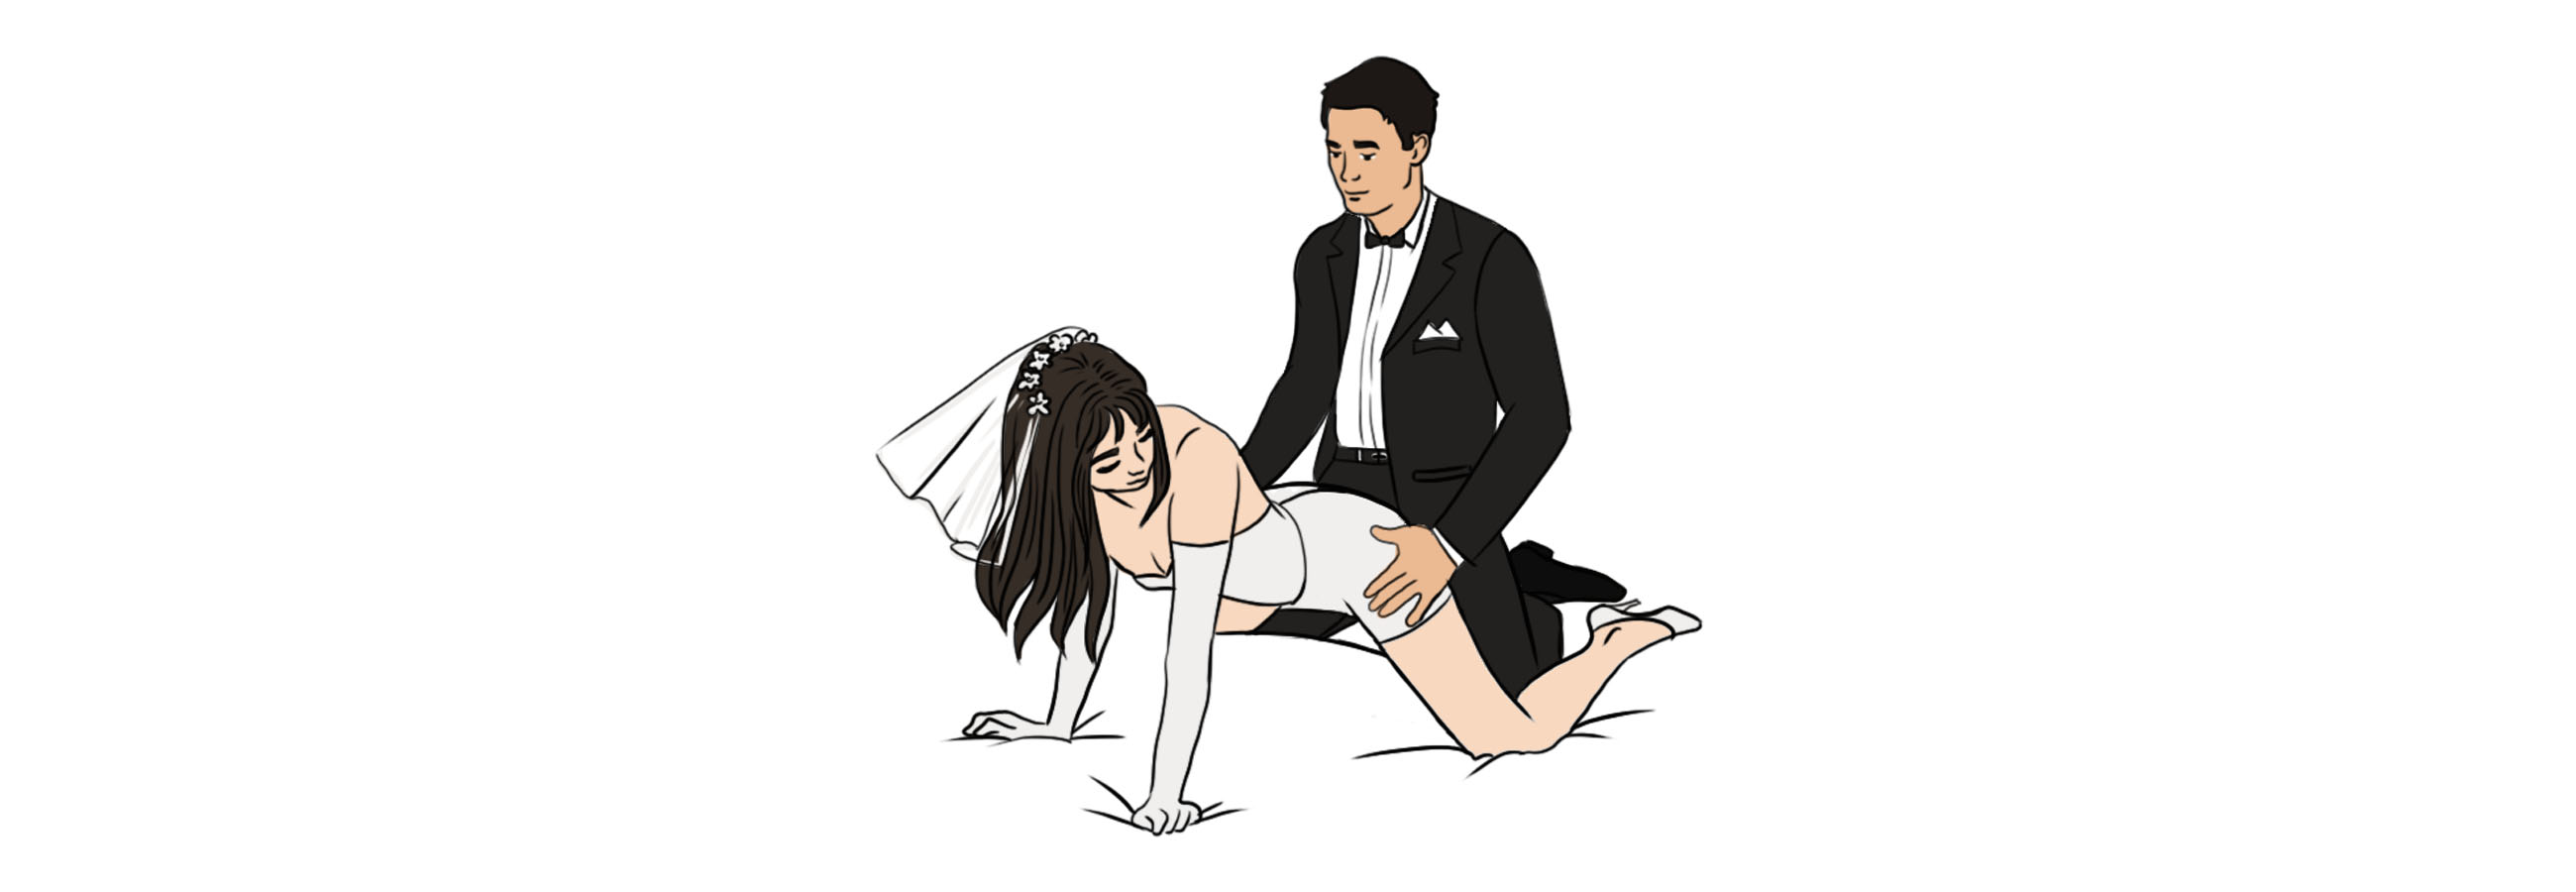 Sexy Sex Positions for Married Couples to Spice Things pic